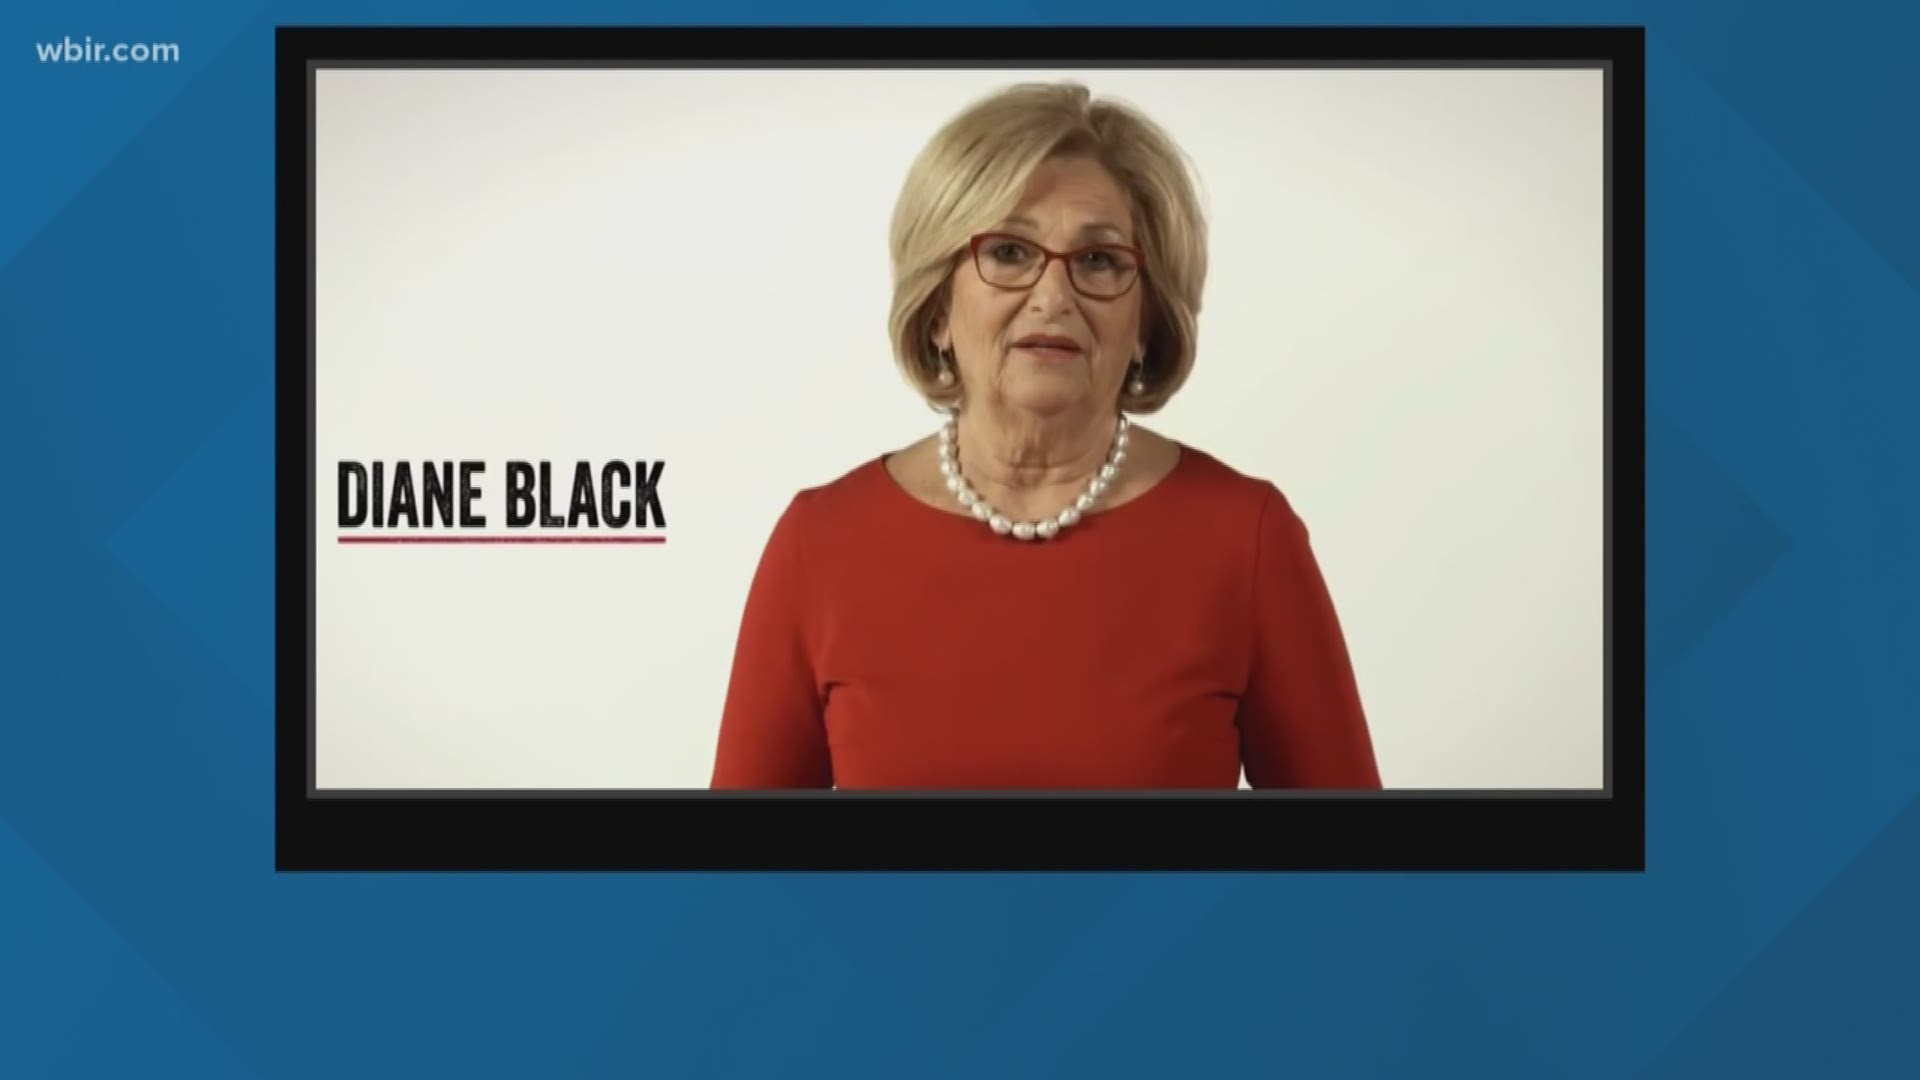 Diane Black is a Republican candidate for governor in Tennessee who has served at both the state and federal level and she believes this is what makes her a unique contender.